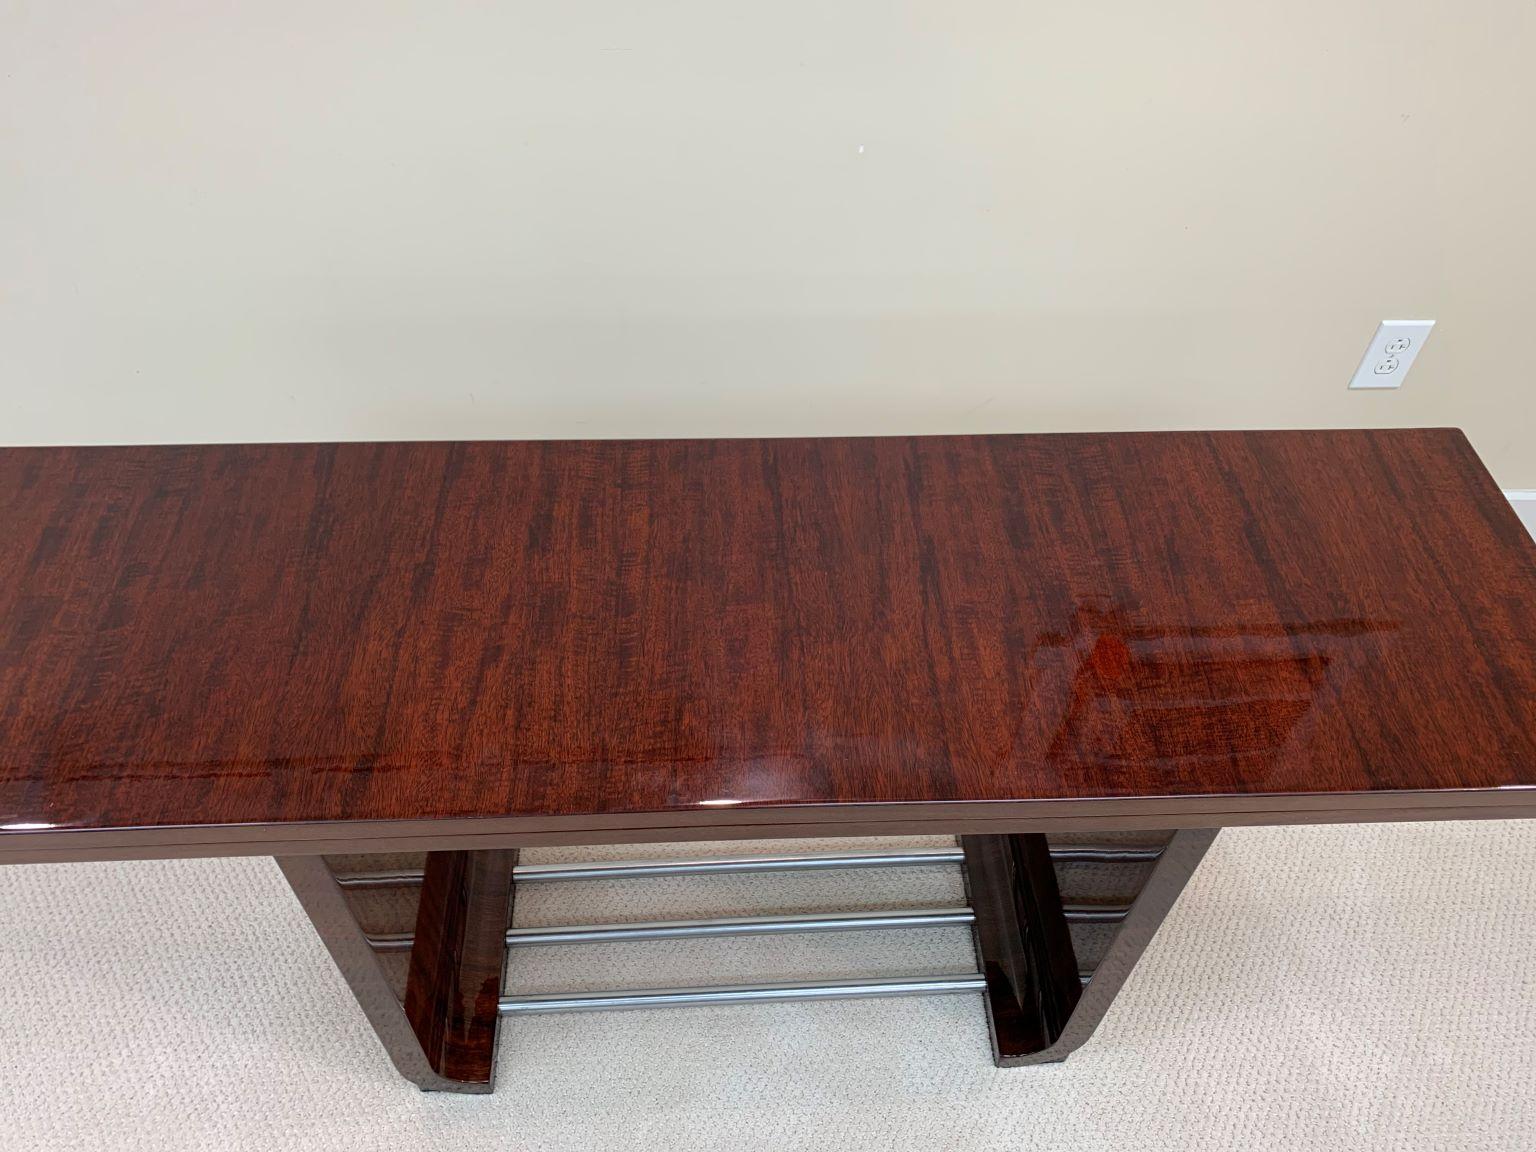 Lacquered Rare Gilbert Rohde Art Deco  Console Table for Herman Miller Circa 1934